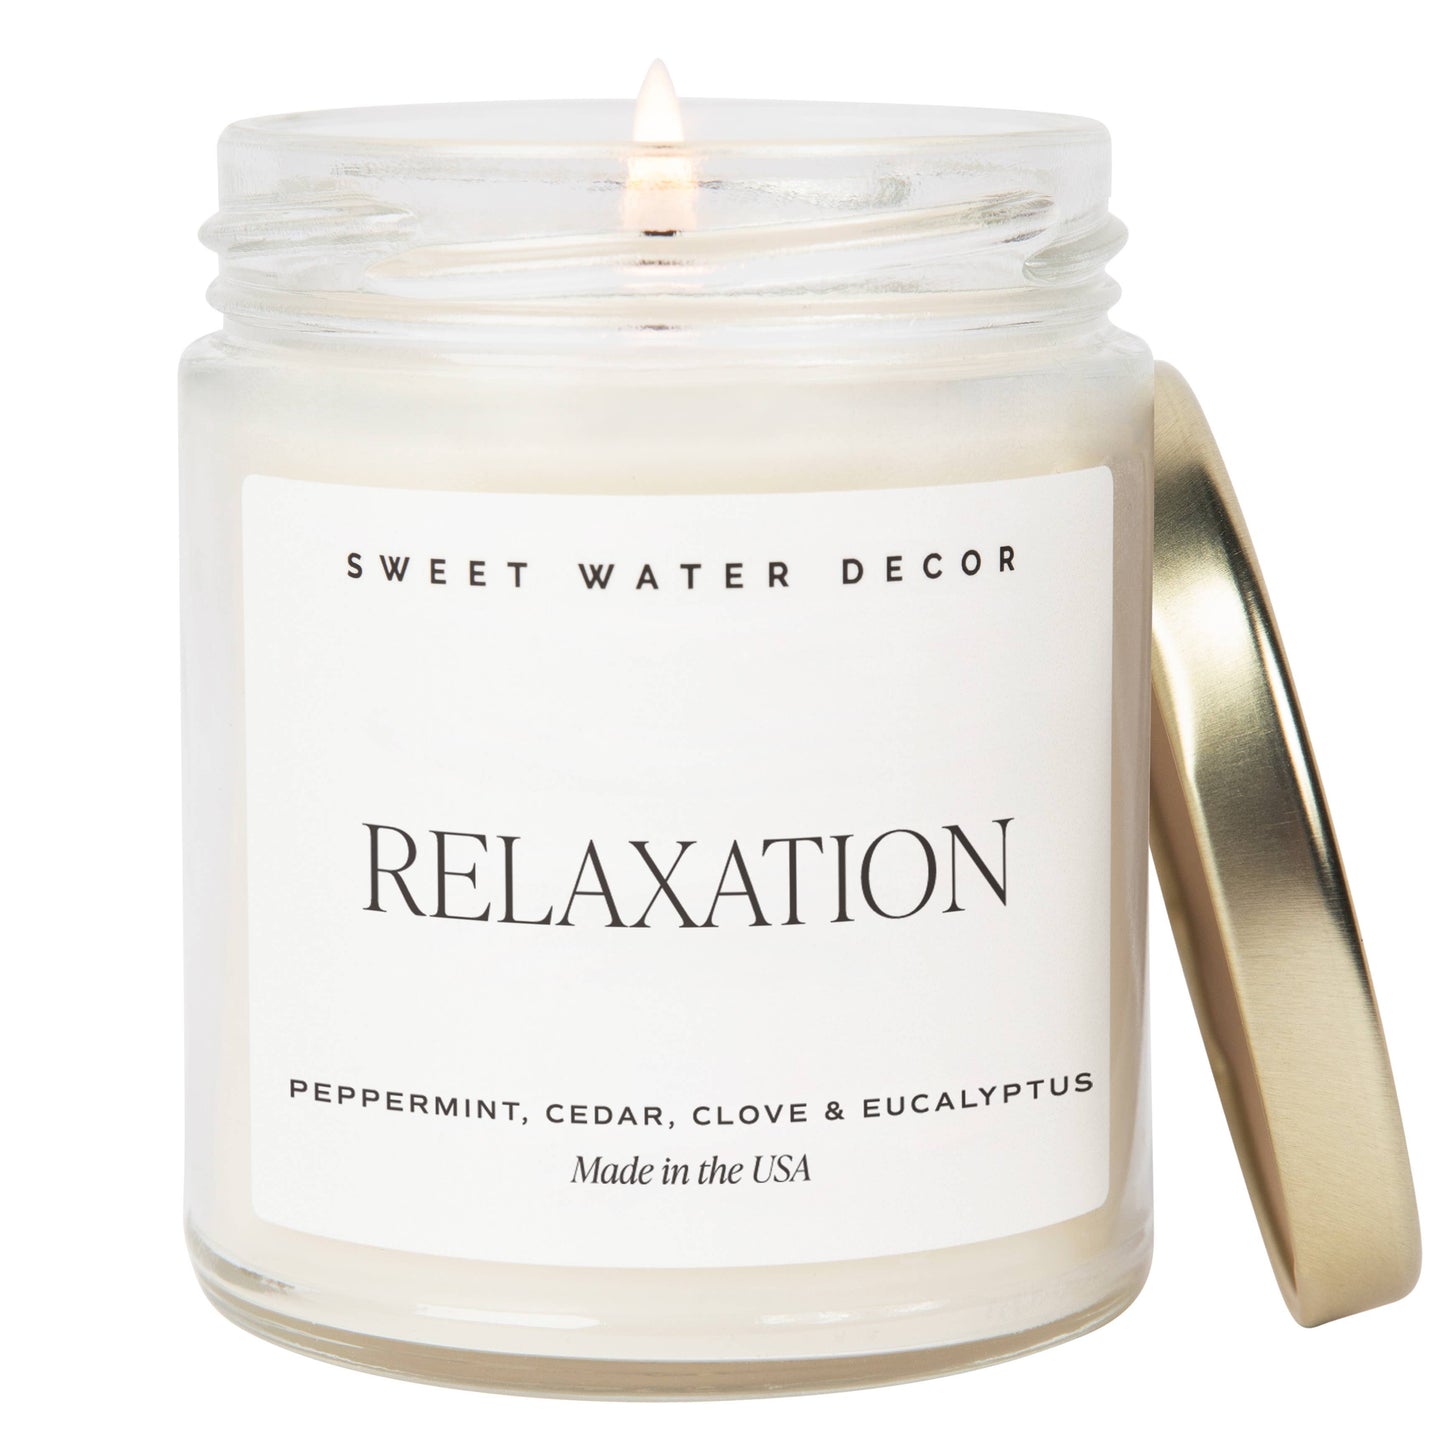 Sweet Water Decor - Relaxation 9 oz Soy Candle - Home Decor & Gifts